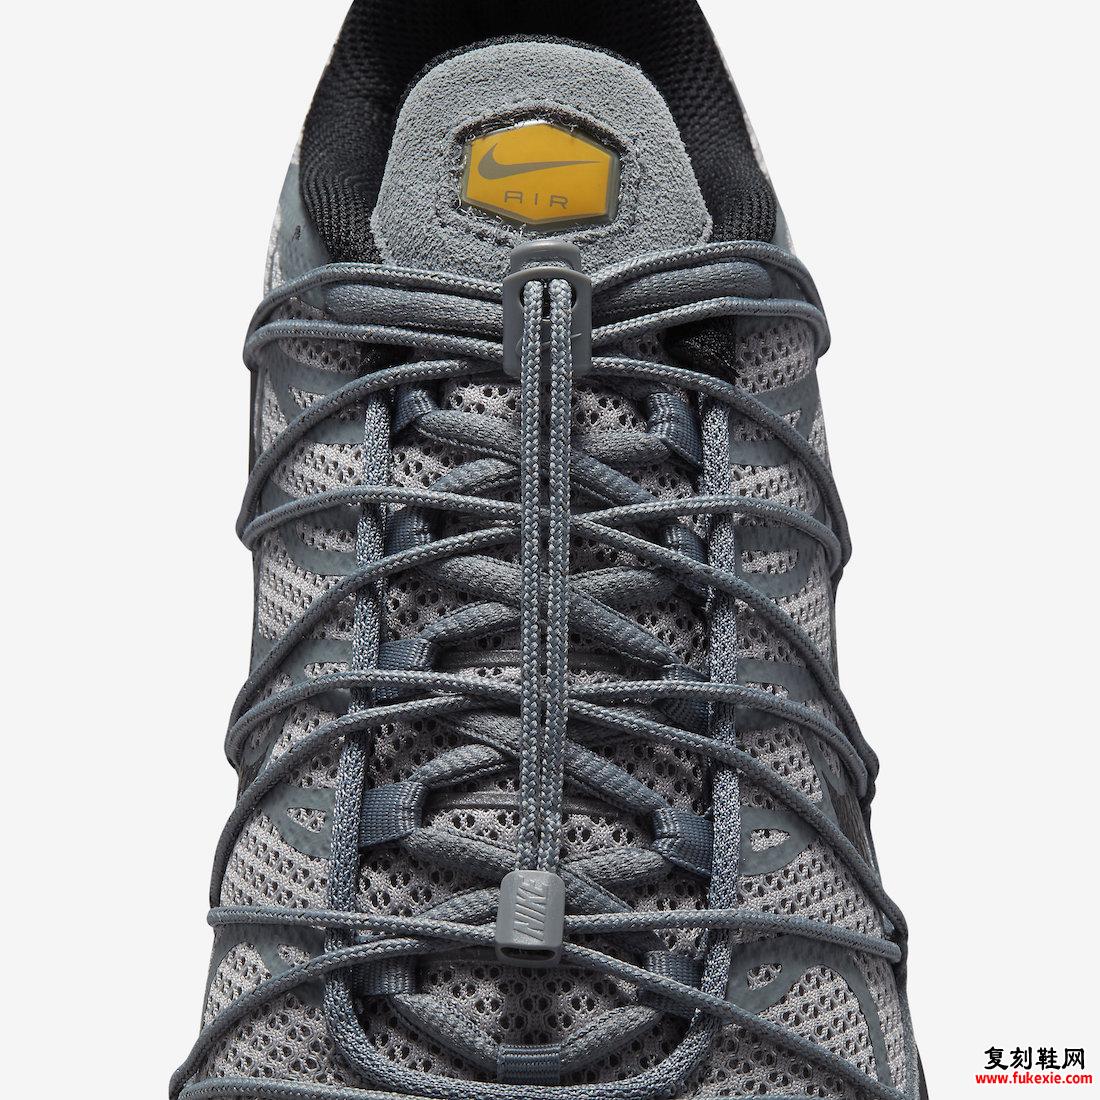 Nike Air Max Plus Grey Reflective FD0670-002 Release Date